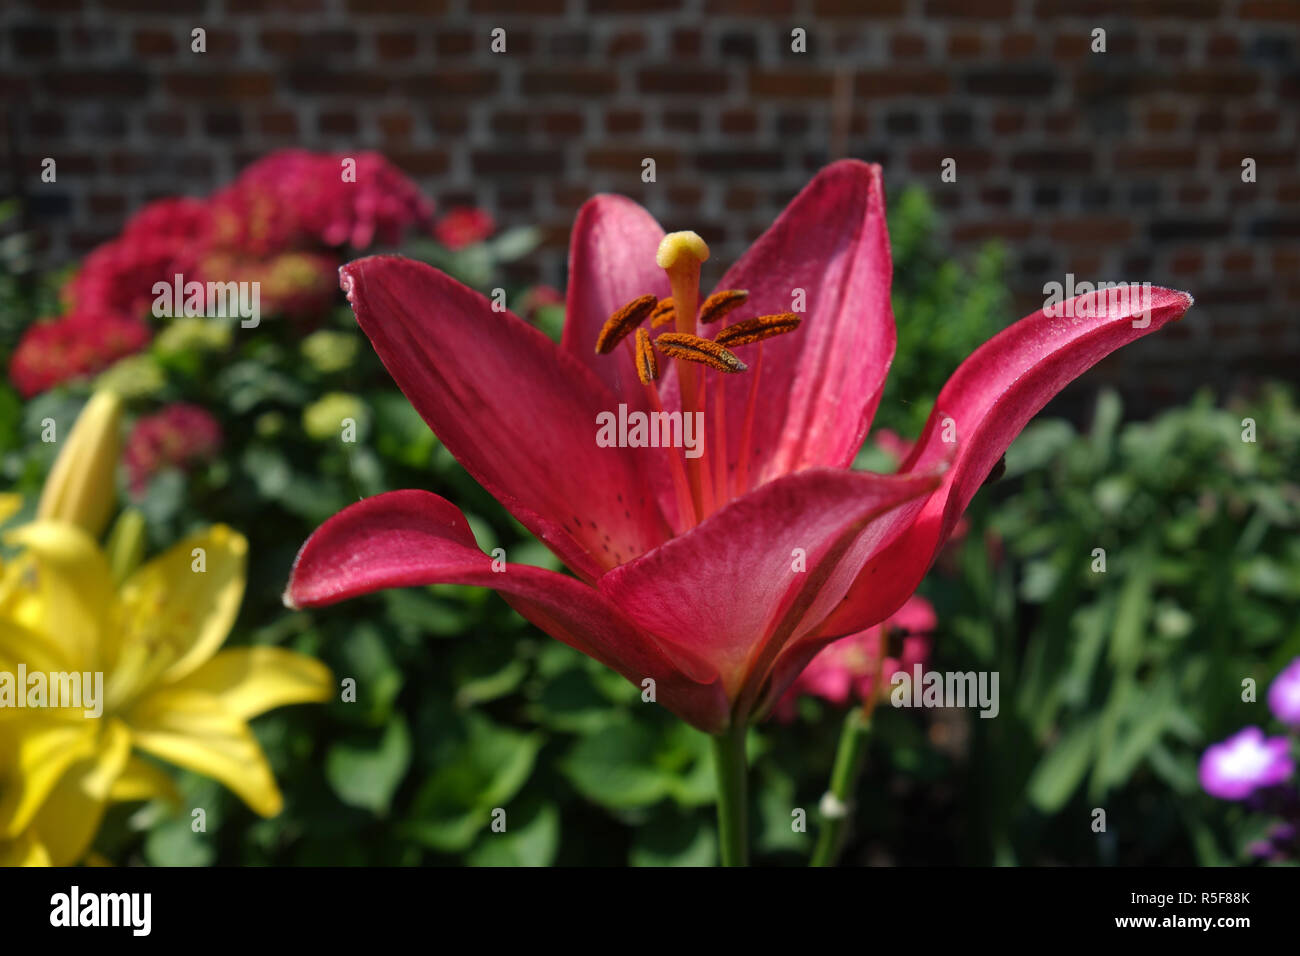 red and yellow lilies in a parish garden Stock Photo